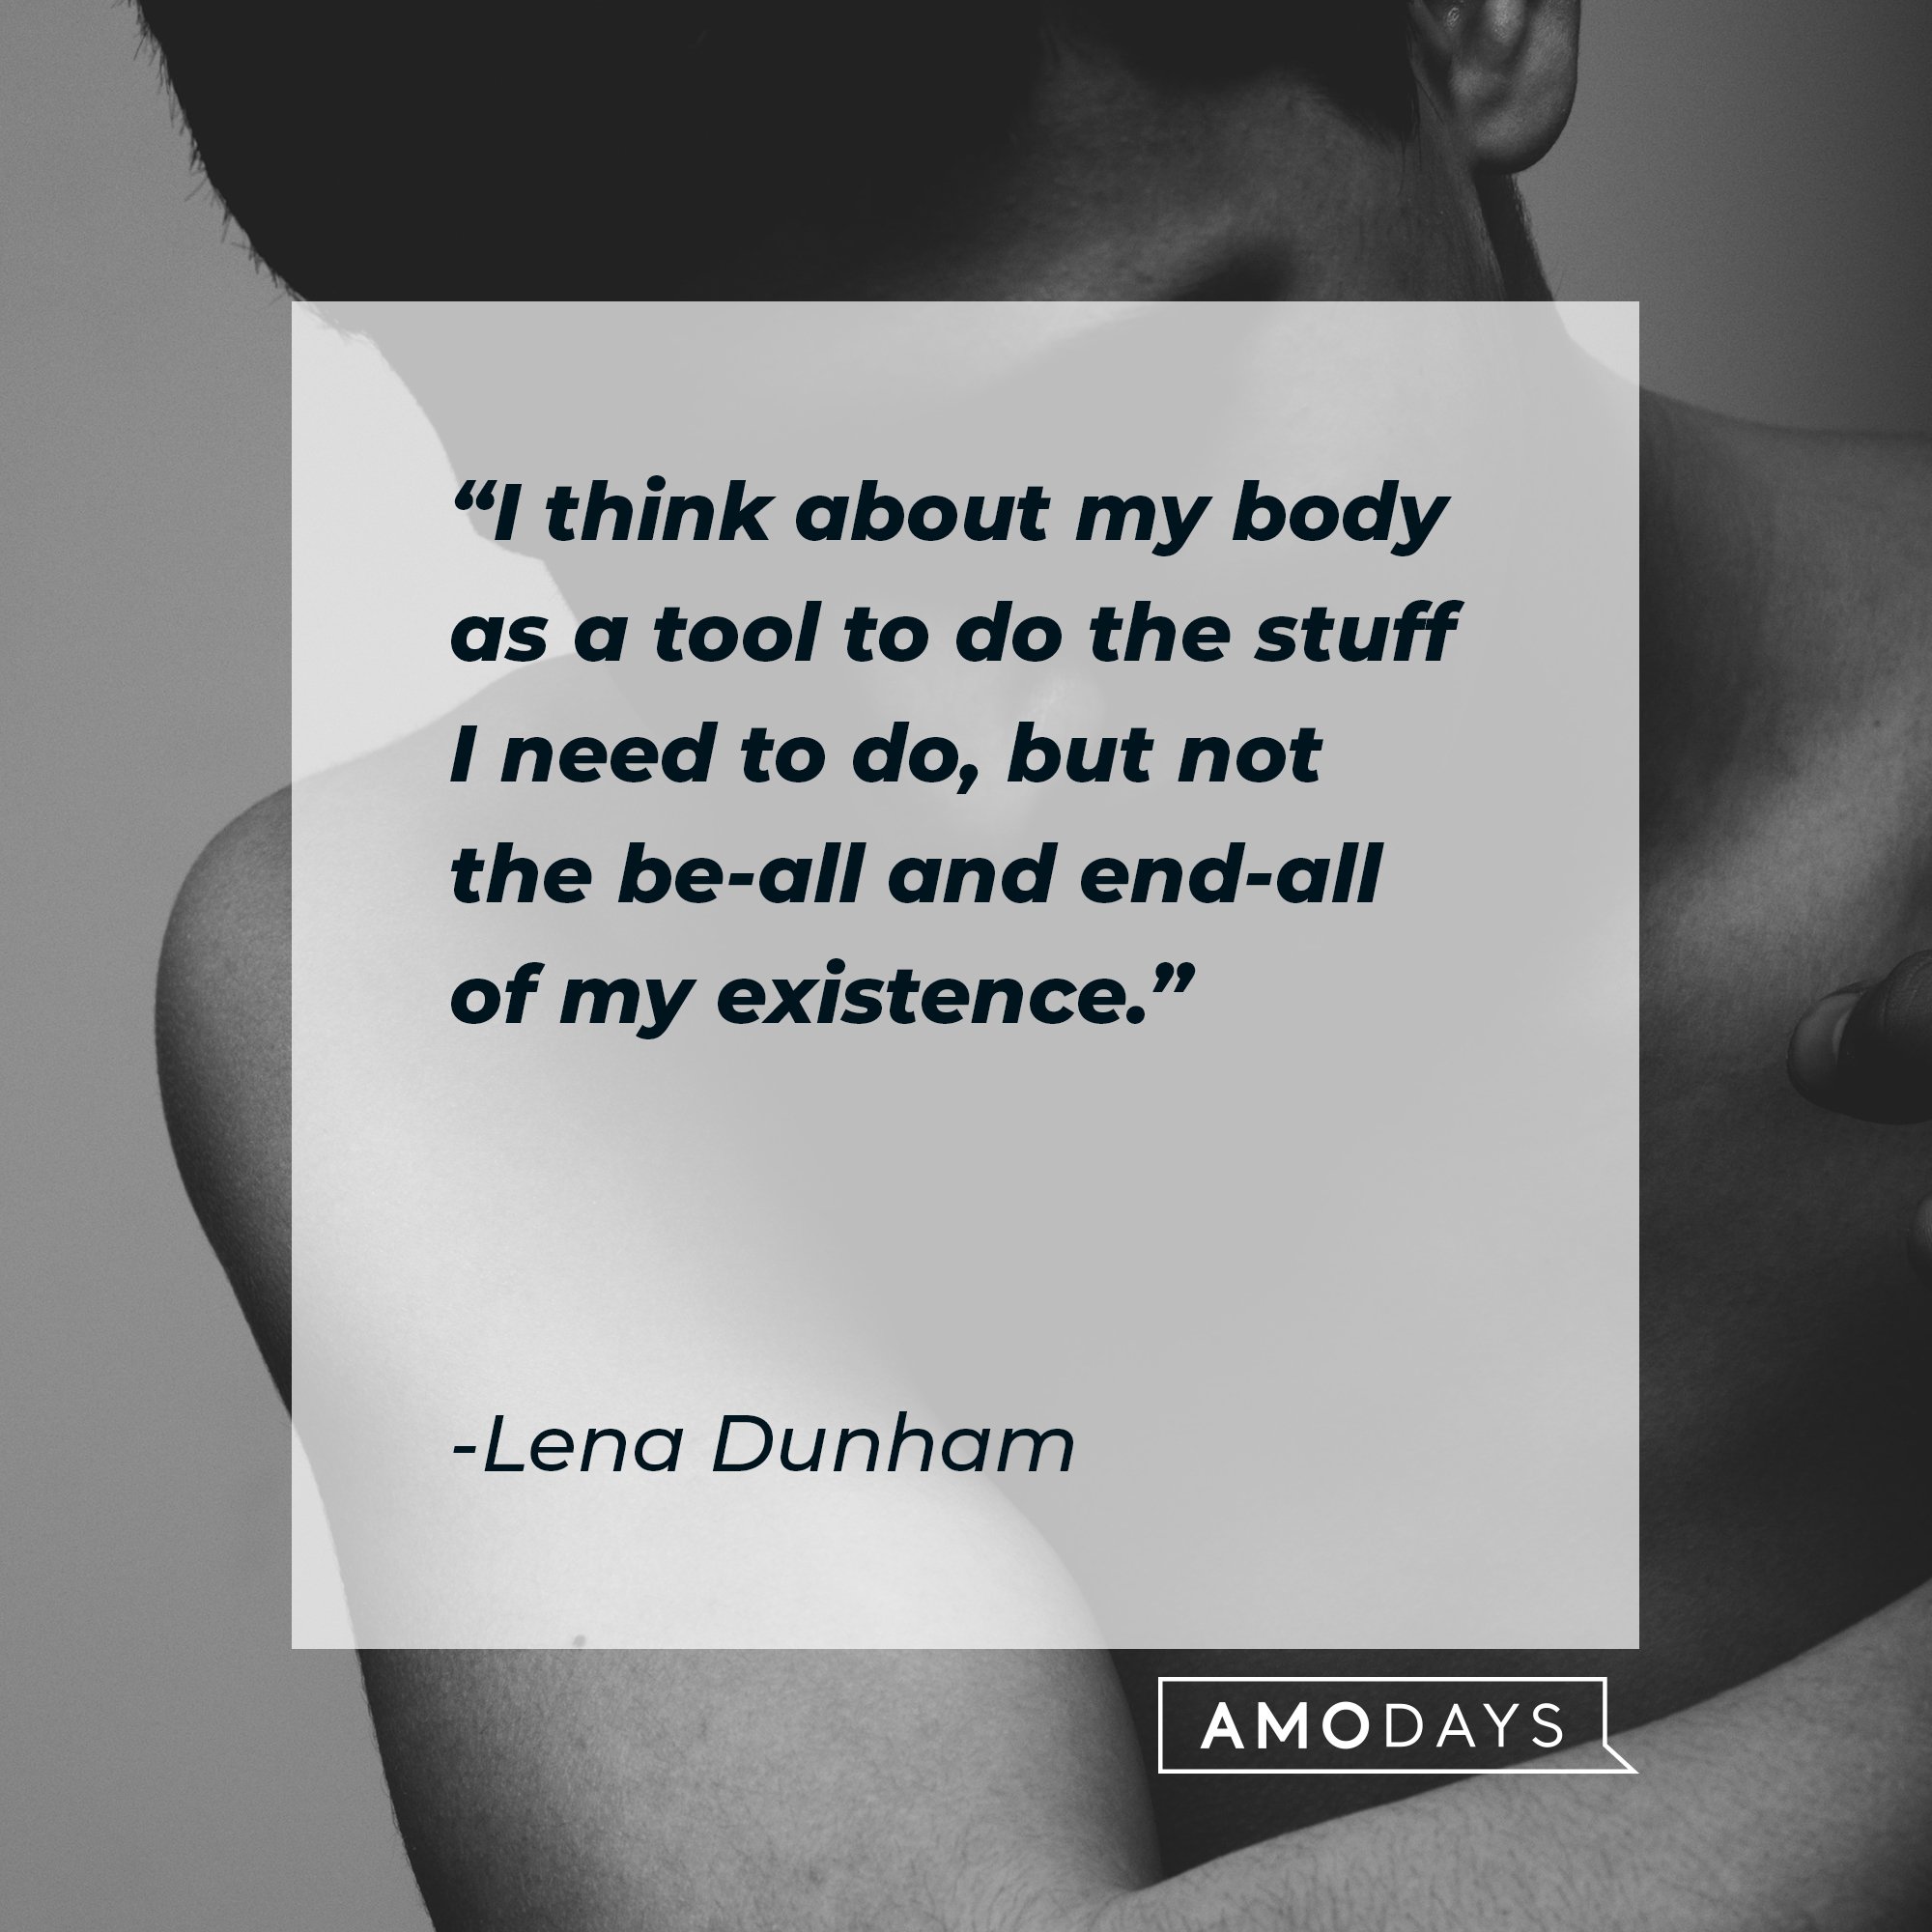  Lena Dunham’s quote: "I think about my body as a tool to do the stuff I need to do, but not the be-all and end-all of my existence."  | Image: AmoDays